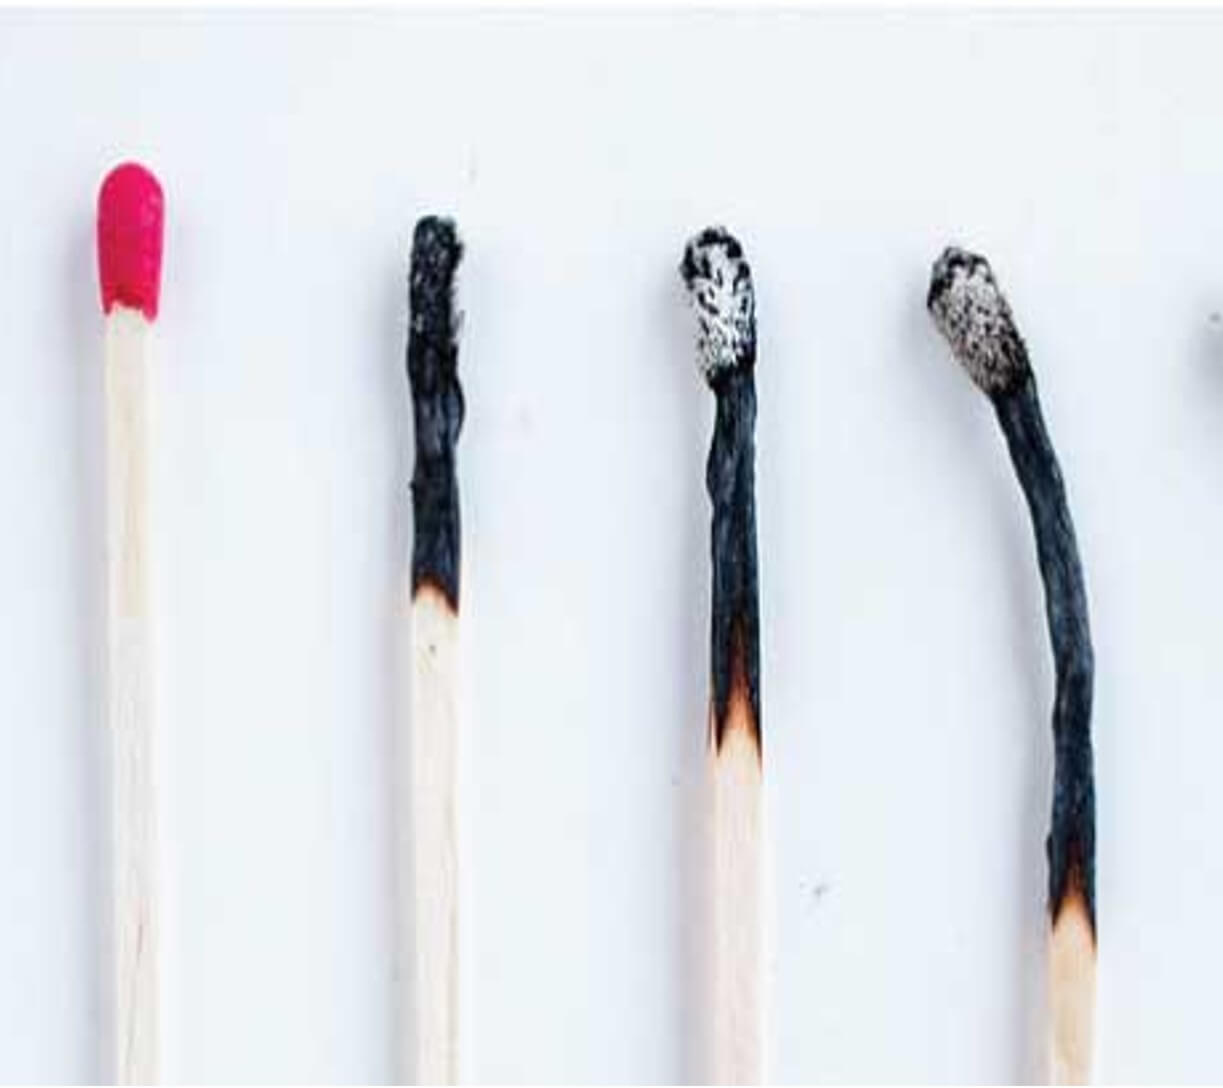 An image of four matches. The first match is unburnt, and each of the following matches are increasingly burnt out.